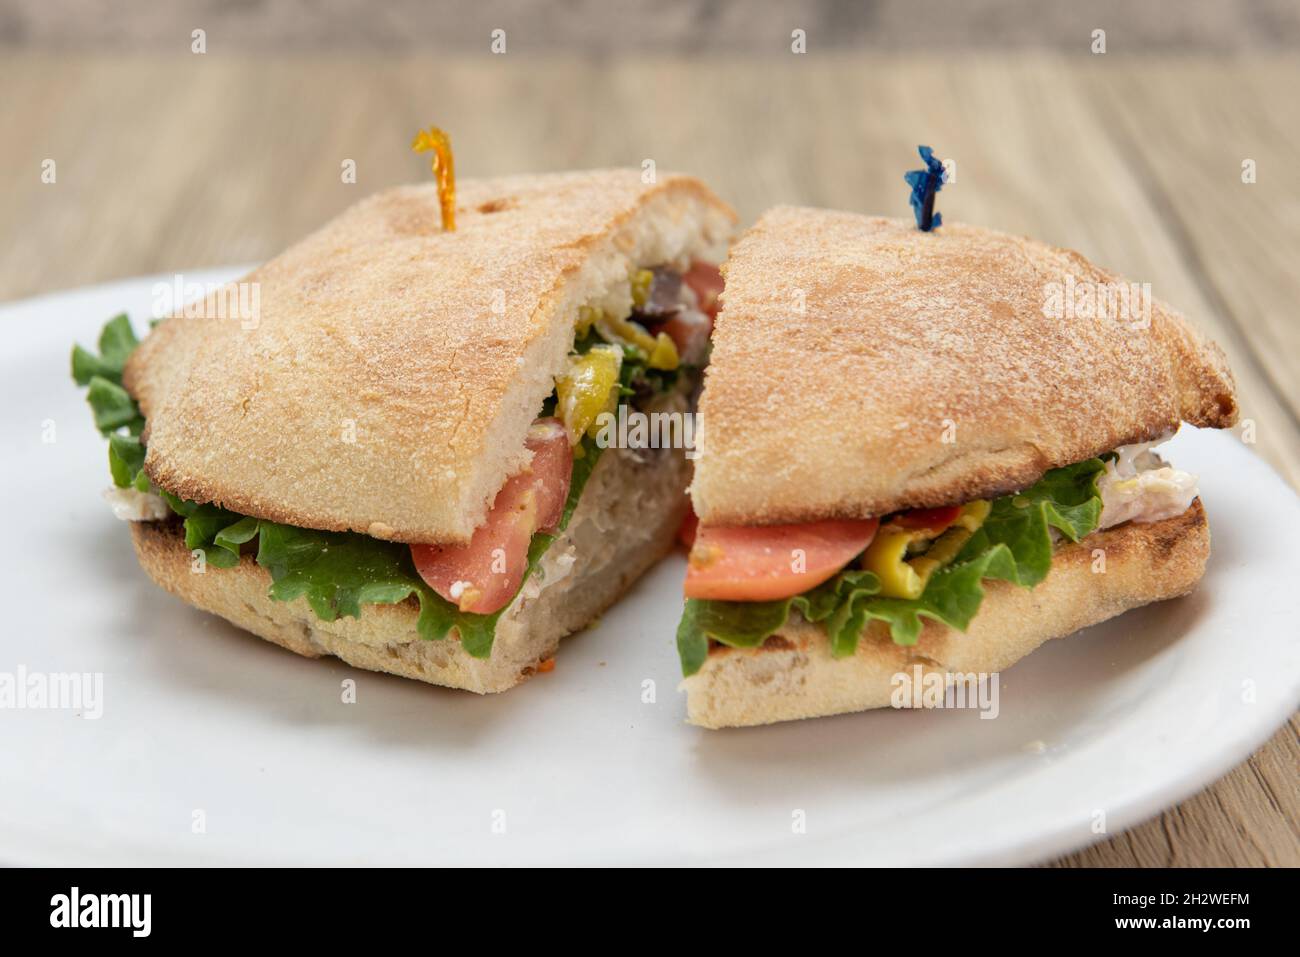 Delicious albacore sandwich loaded with chopped vegetables, roma tomatoes and garlic basil sauce. Stock Photo